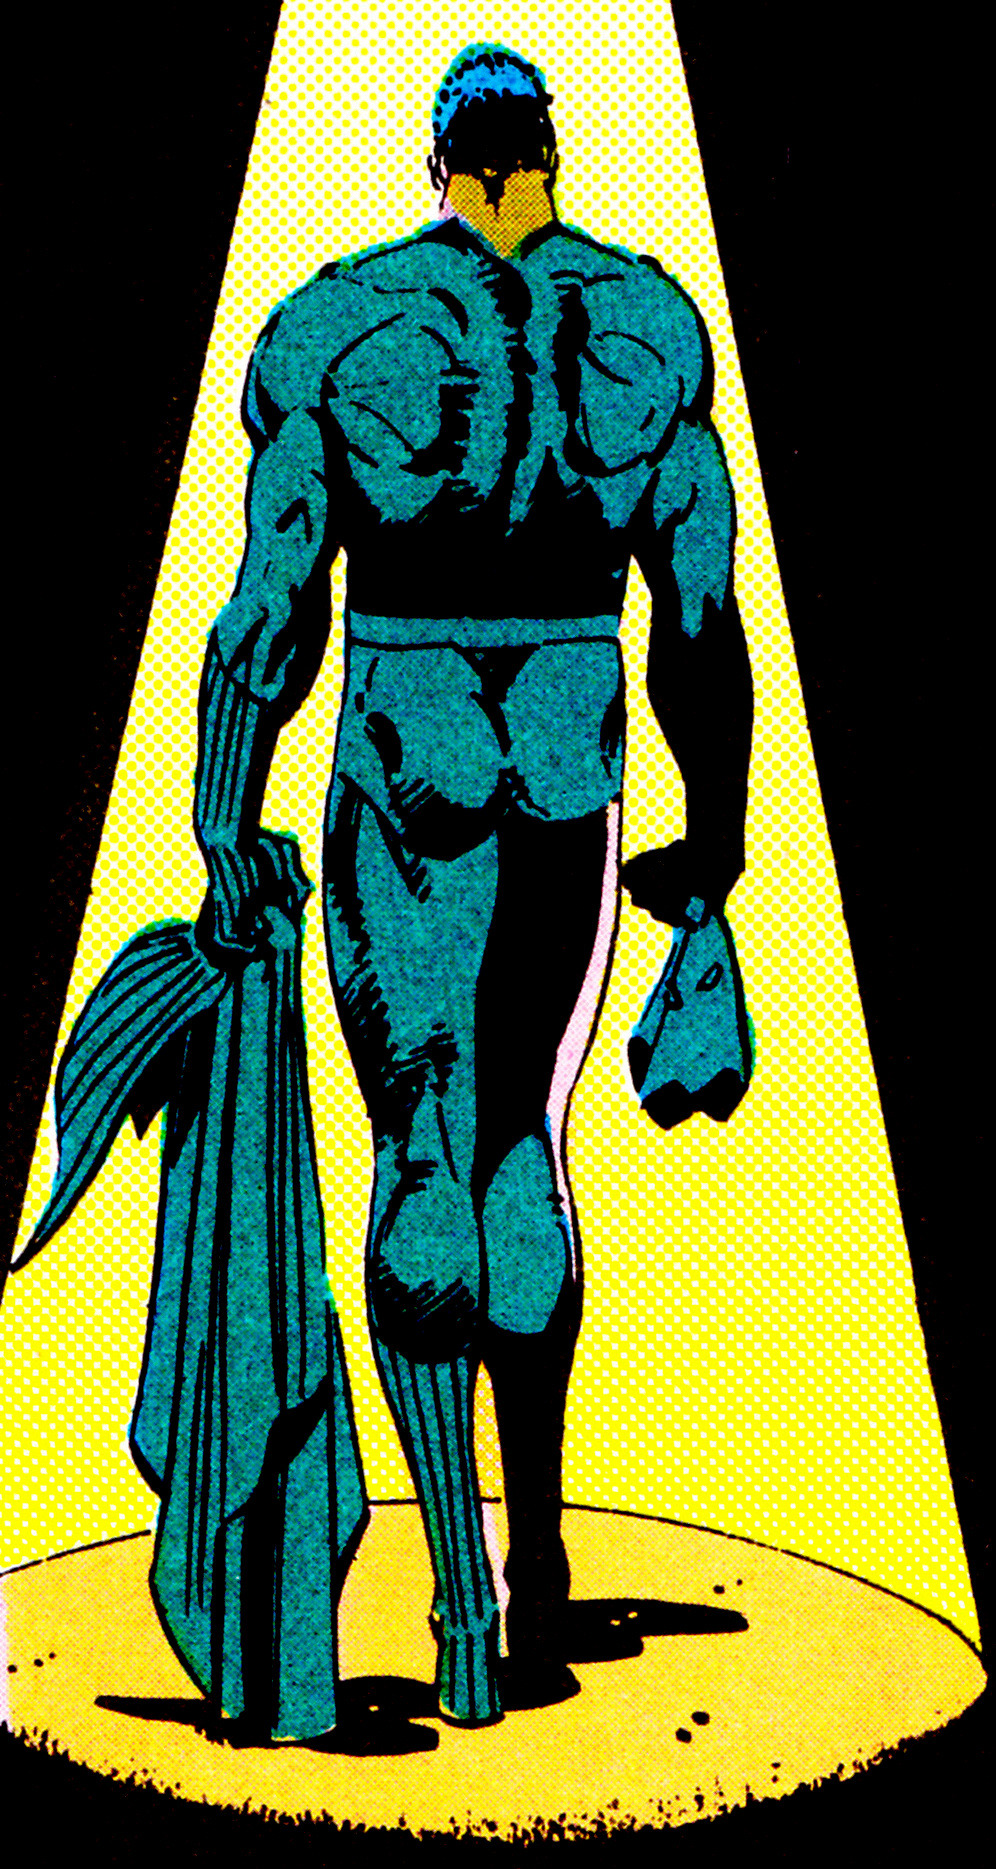 Black Panther’s Last ActBLACK PANTHER VOL. 2, #1 (July 1988)Art by Denys Cowan